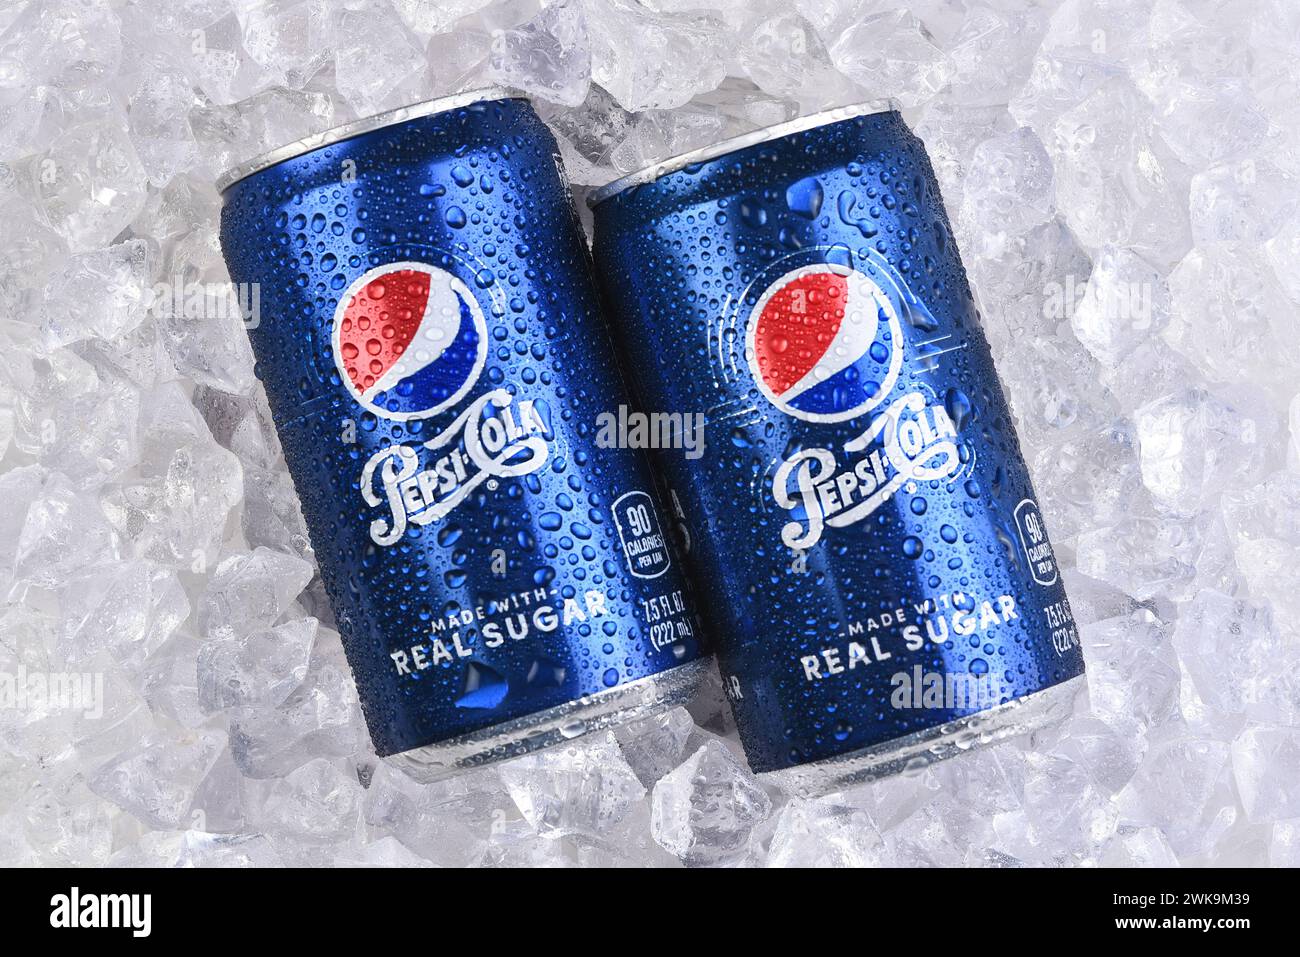 IRVINE, CALIFORNIA - 18 FEB 2024: Two mini cans of Pepsi Real Sugar on a bed of ice with condensation. Stock Photo